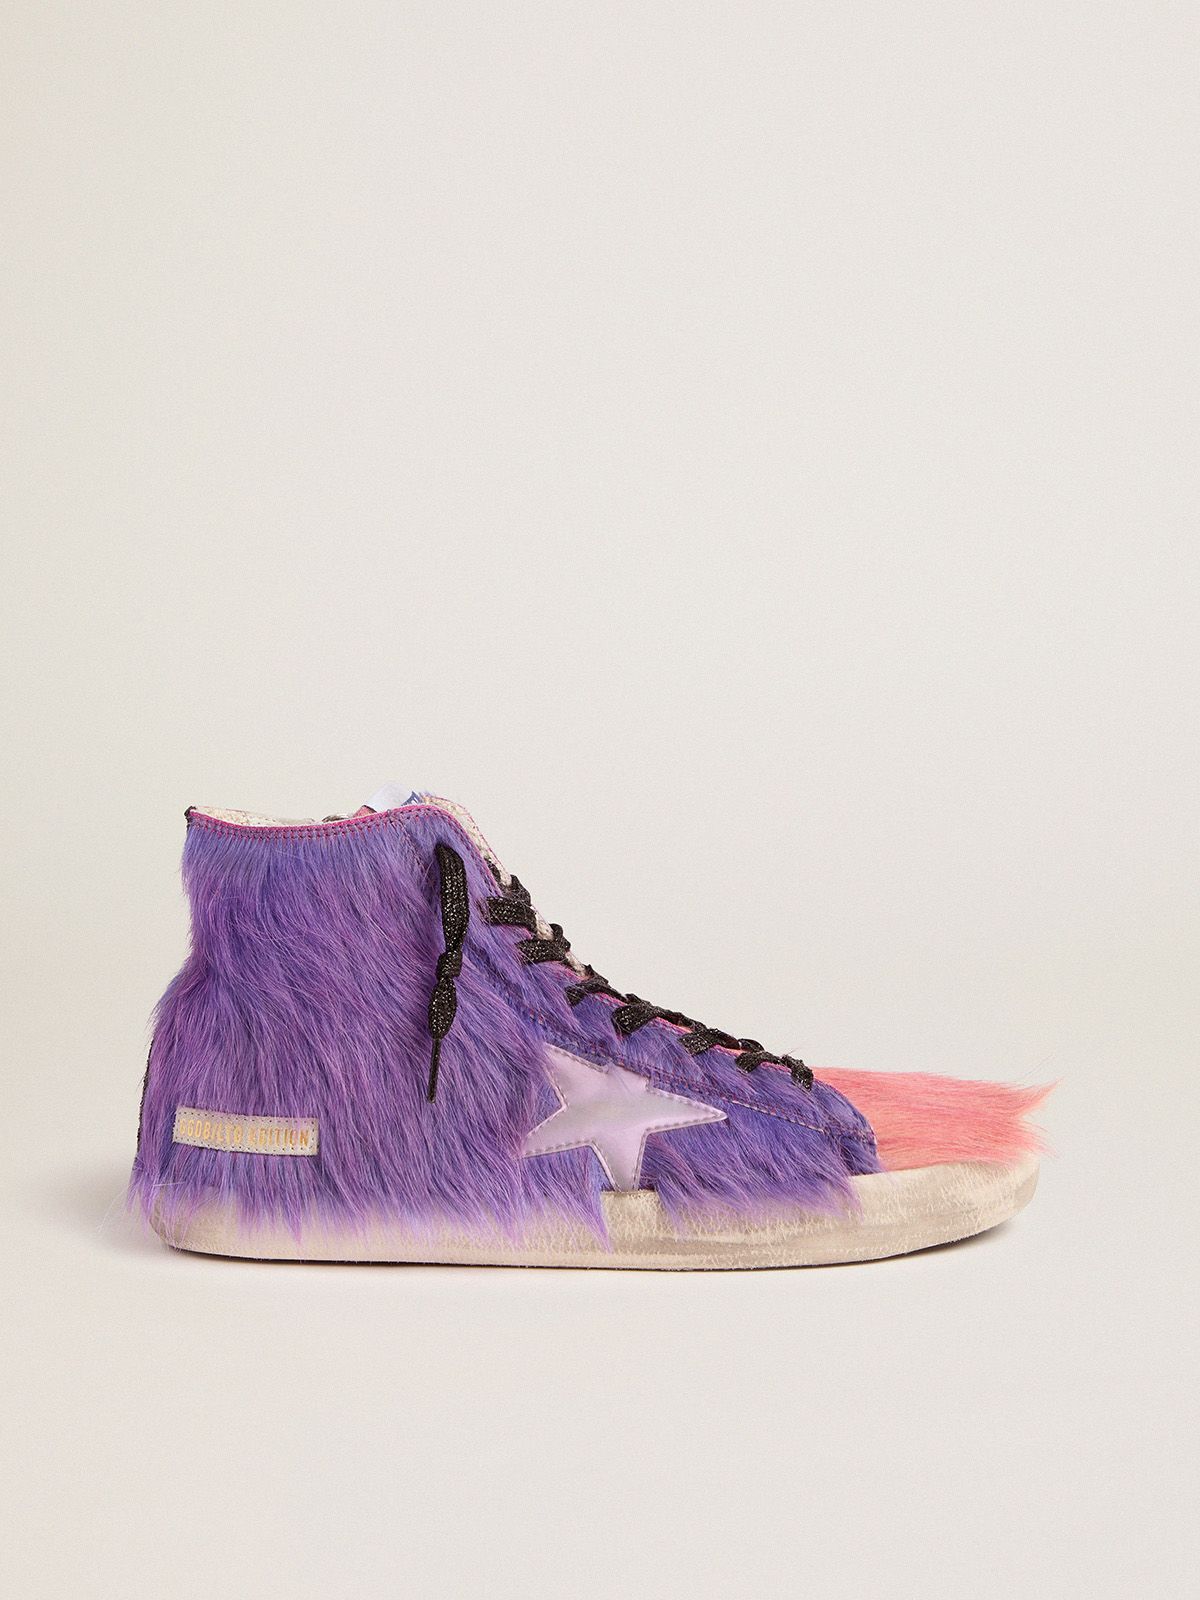 Men’s Limited Edition lilac and pink pony skin Francy sneakers | 